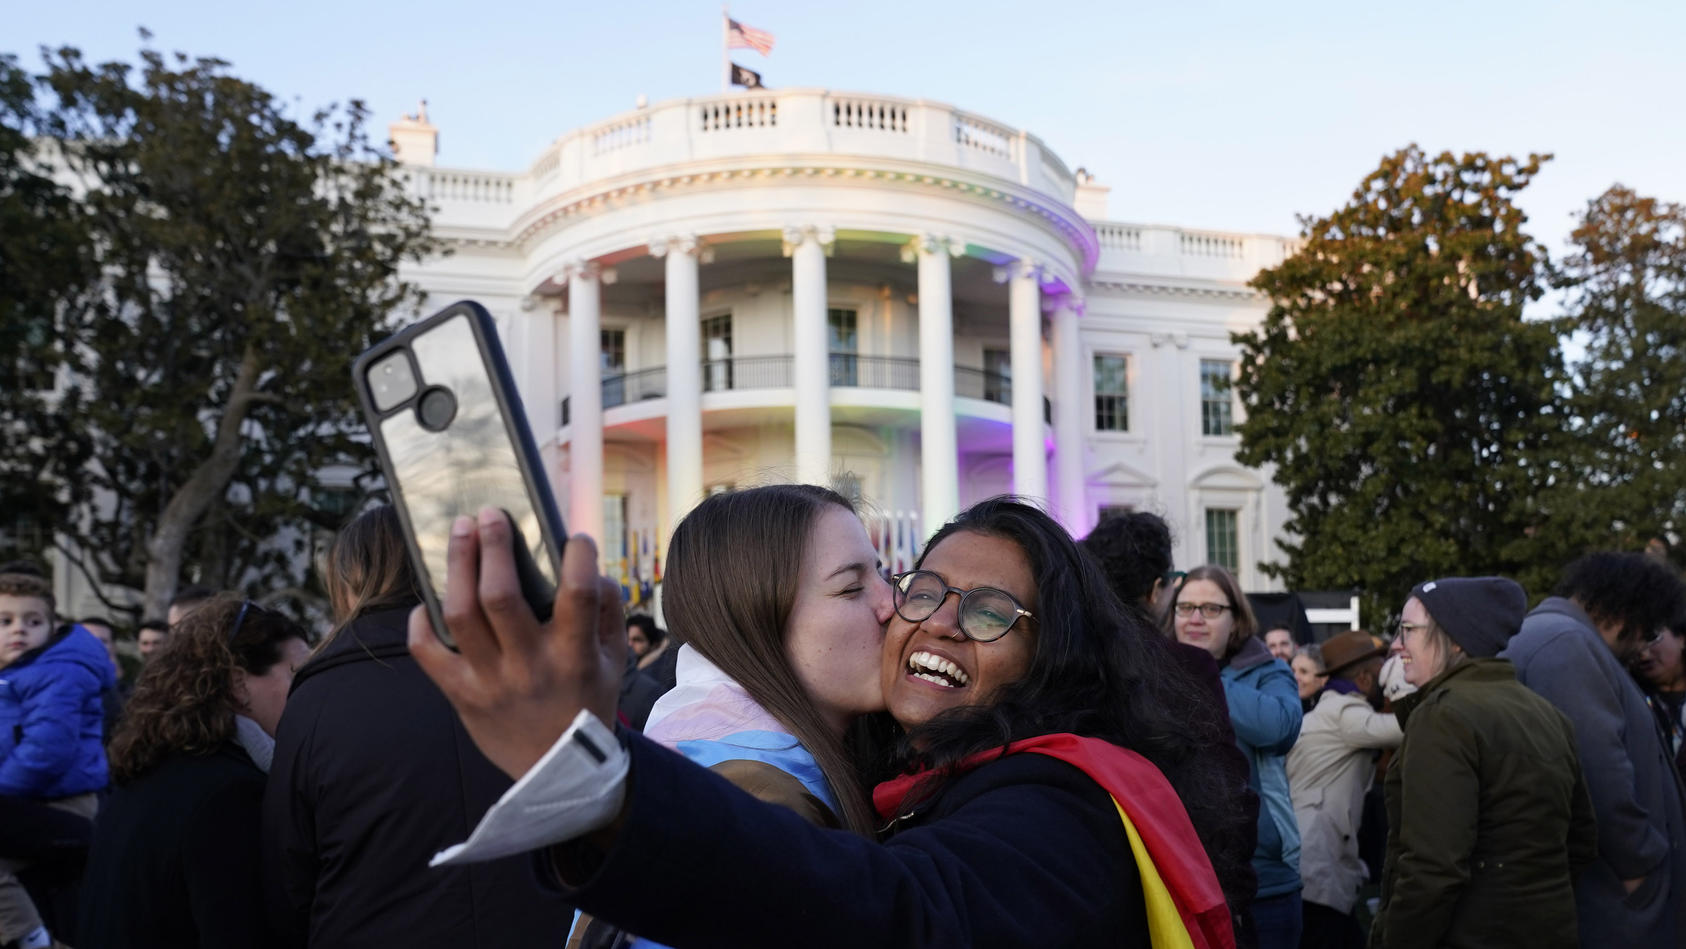 Aparna Shrivastava, right, takes a photo as her partner Shelby Teeter gives her a kiss, after President Joe Biden signed the Respect for Marriage Act, Tuesday, Dec. 13, 2022, on the South Lawn of the White House in Washington. (AP Photo/Andrew Harnik